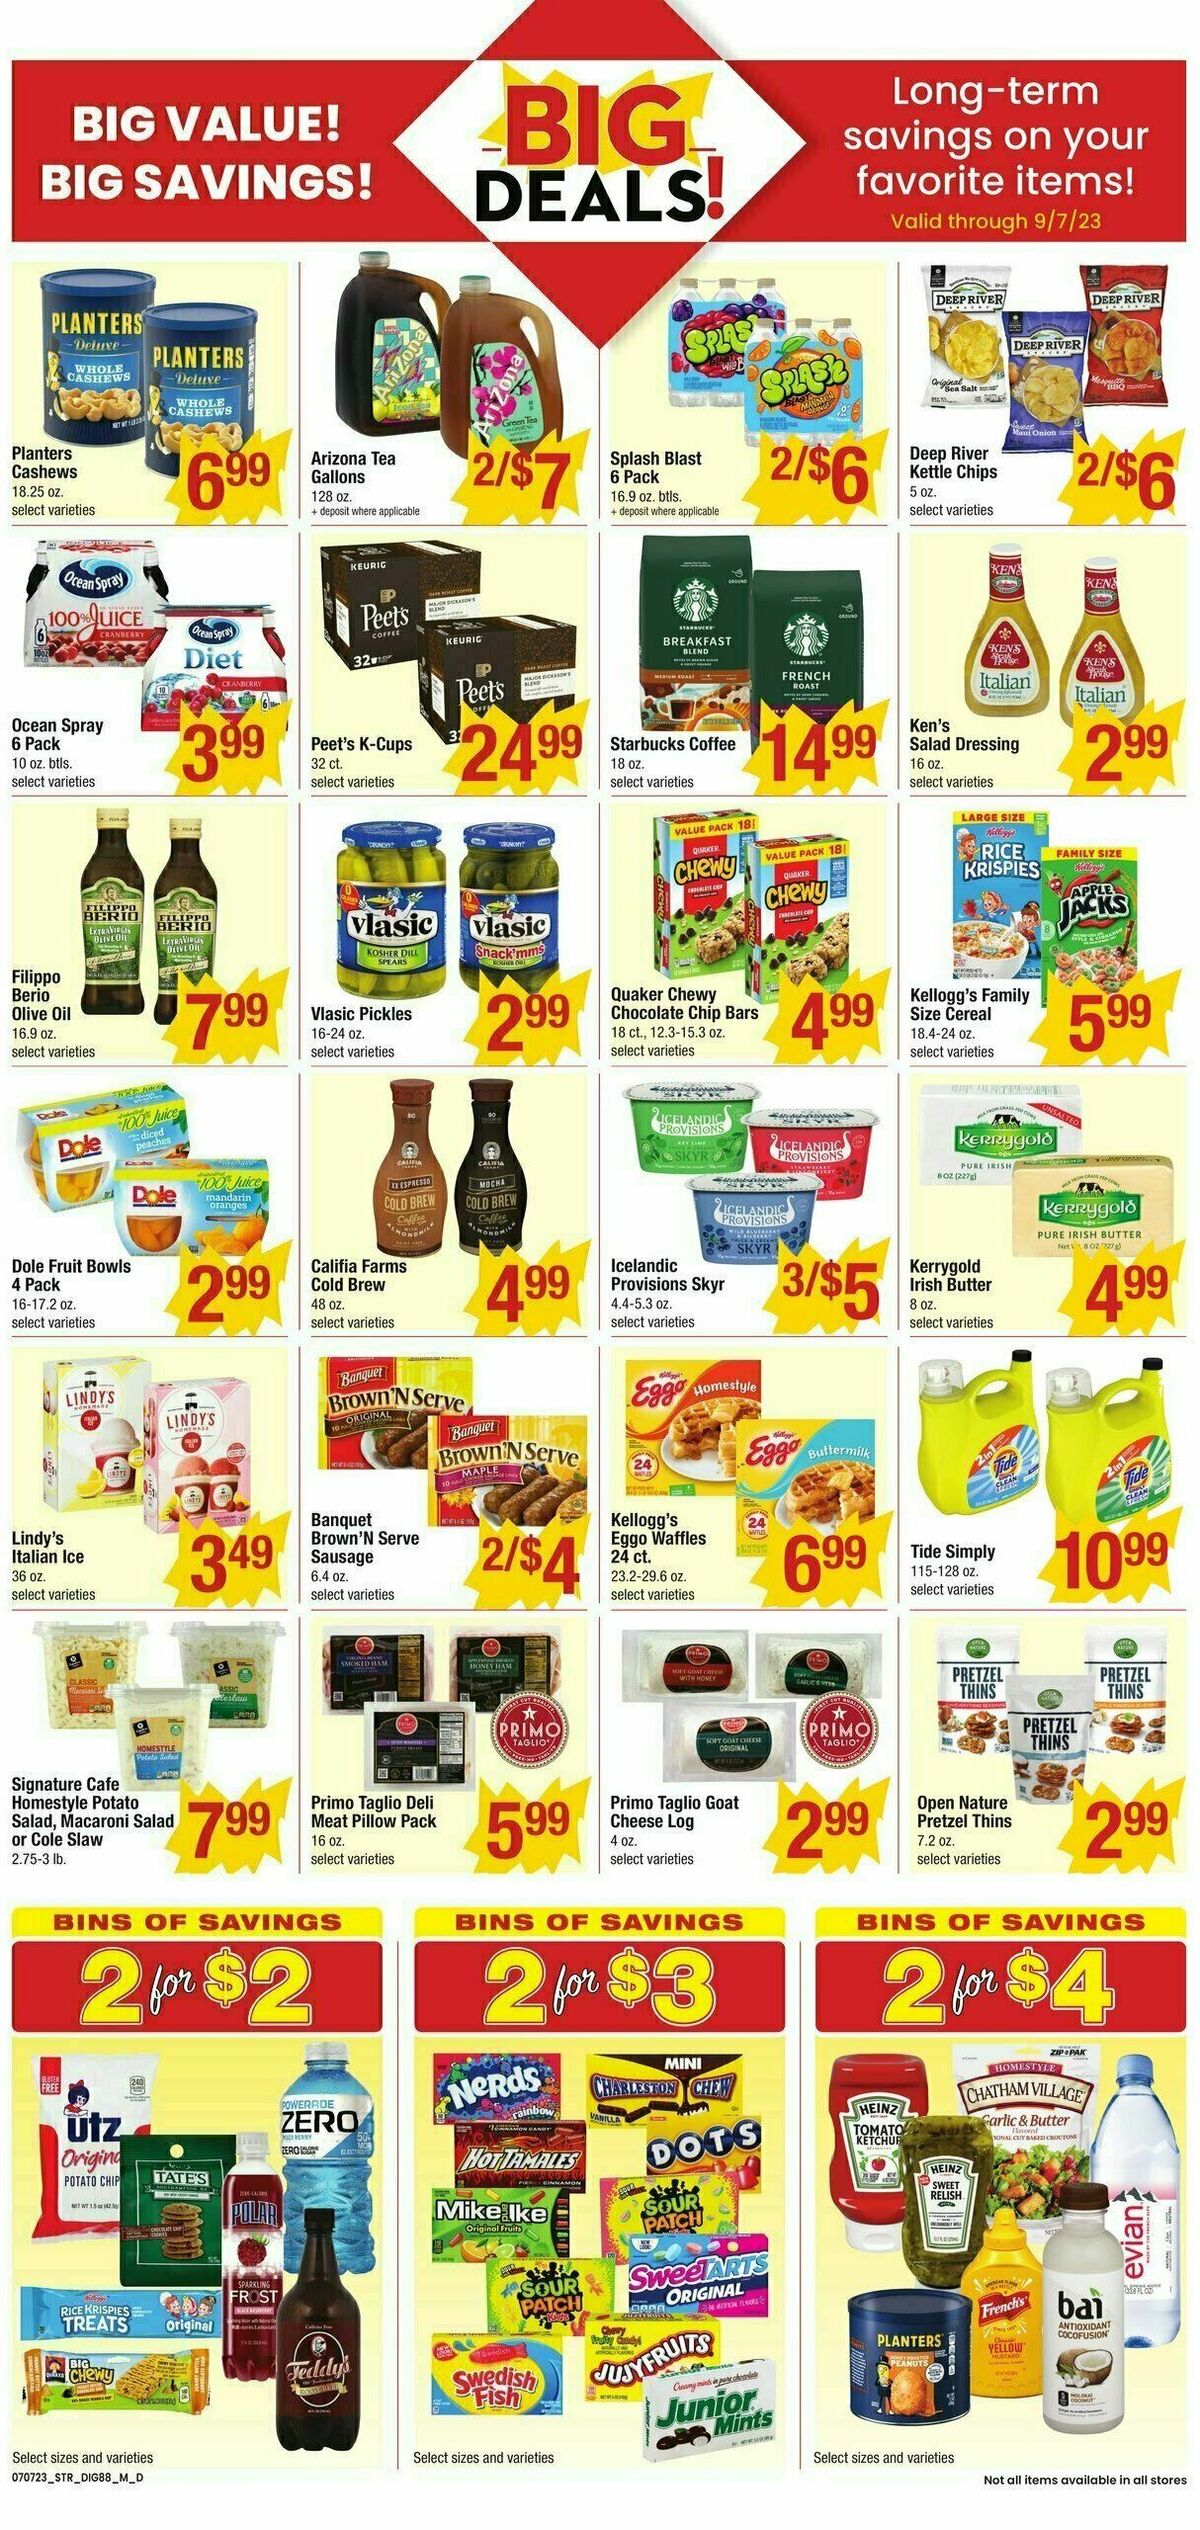 Star Market Weekly Ad from July 7